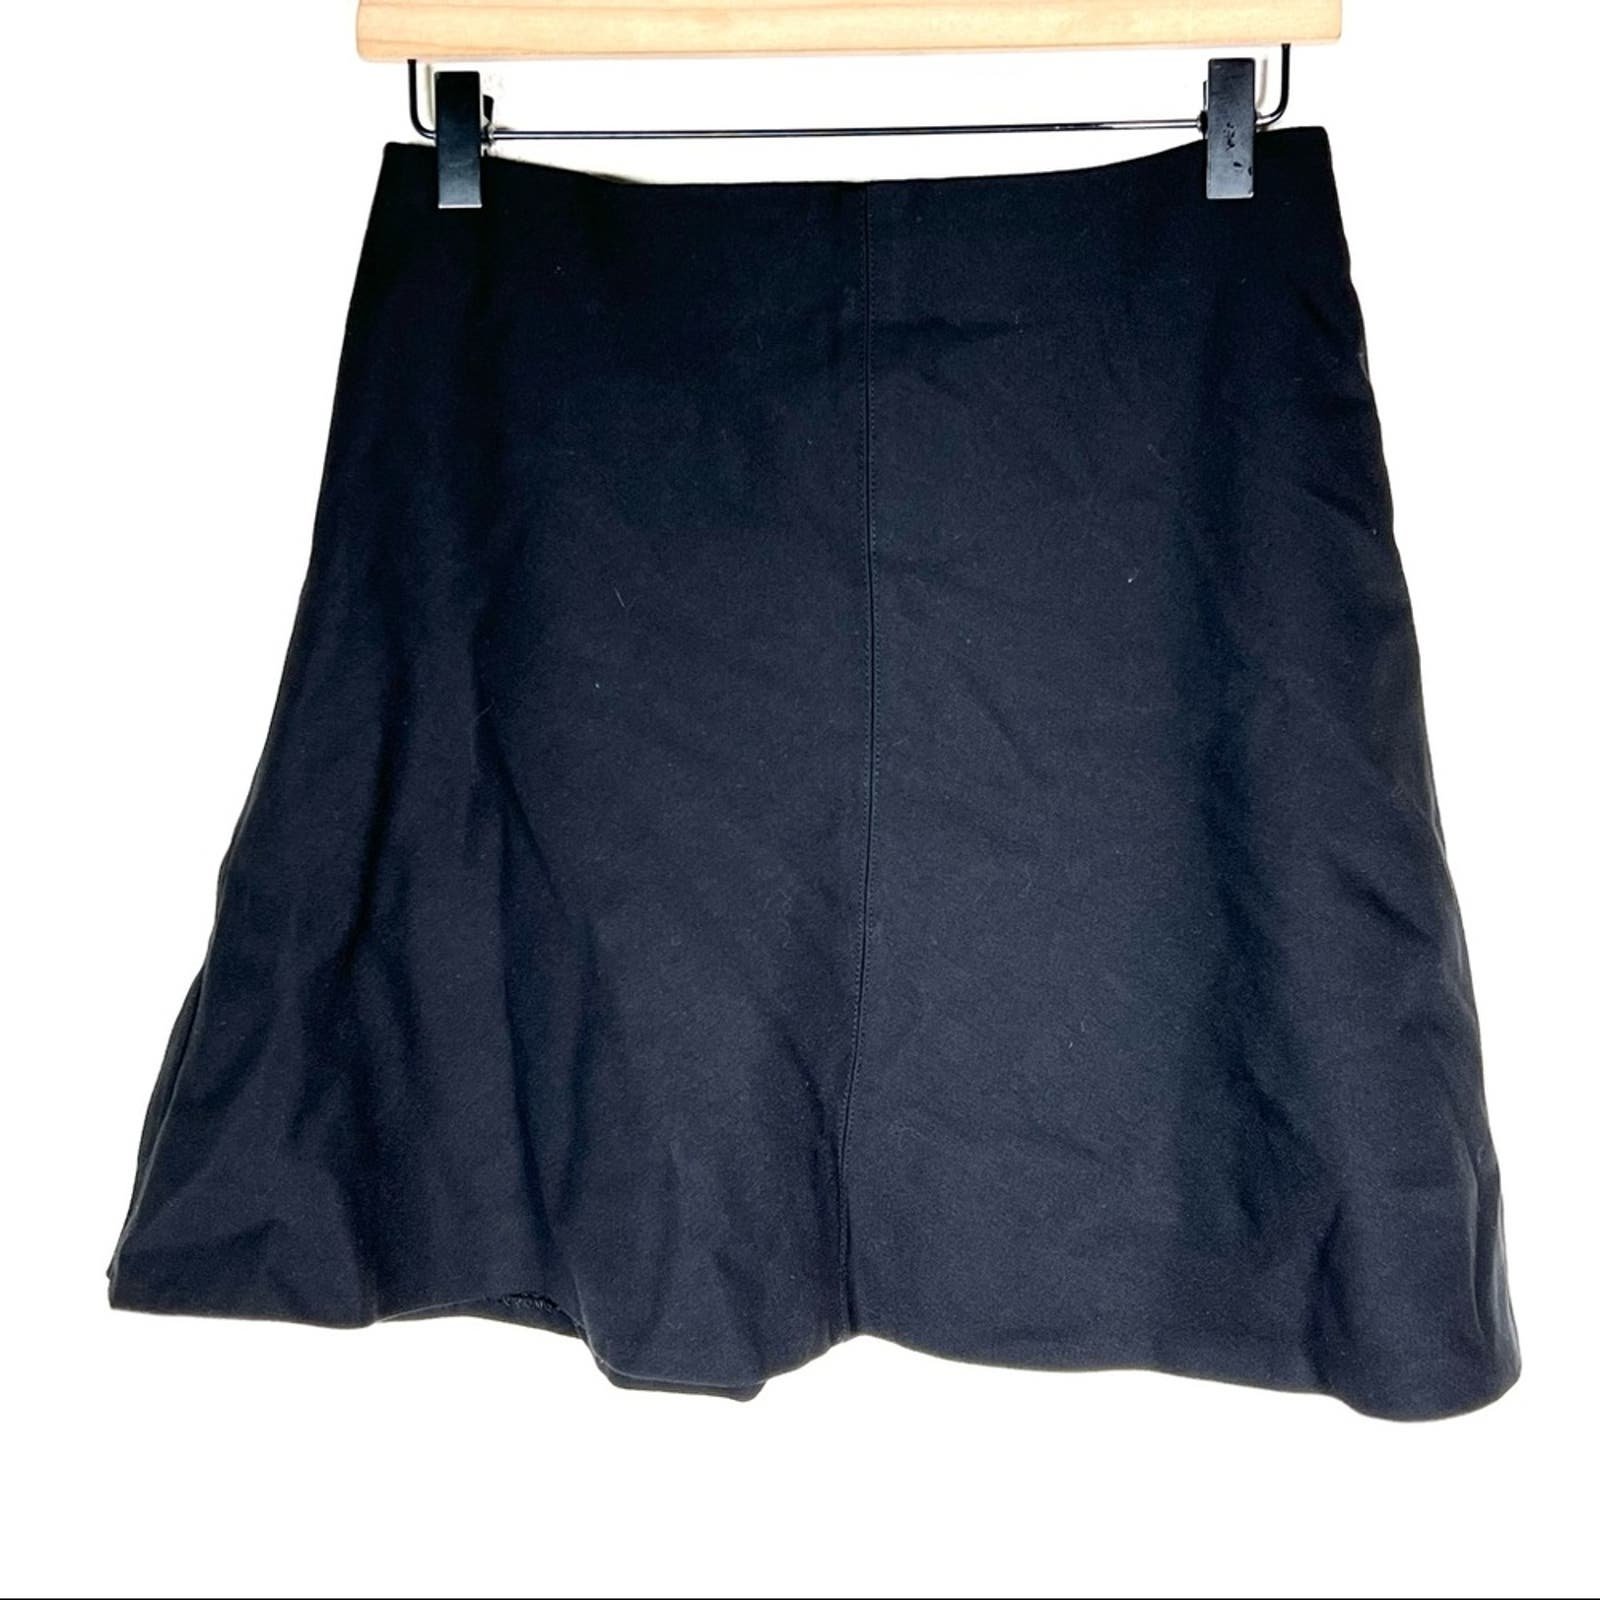 reasonable price Loft black elastic waist casual A-line skirt size small S b34 fTW4lKUij US Outlet